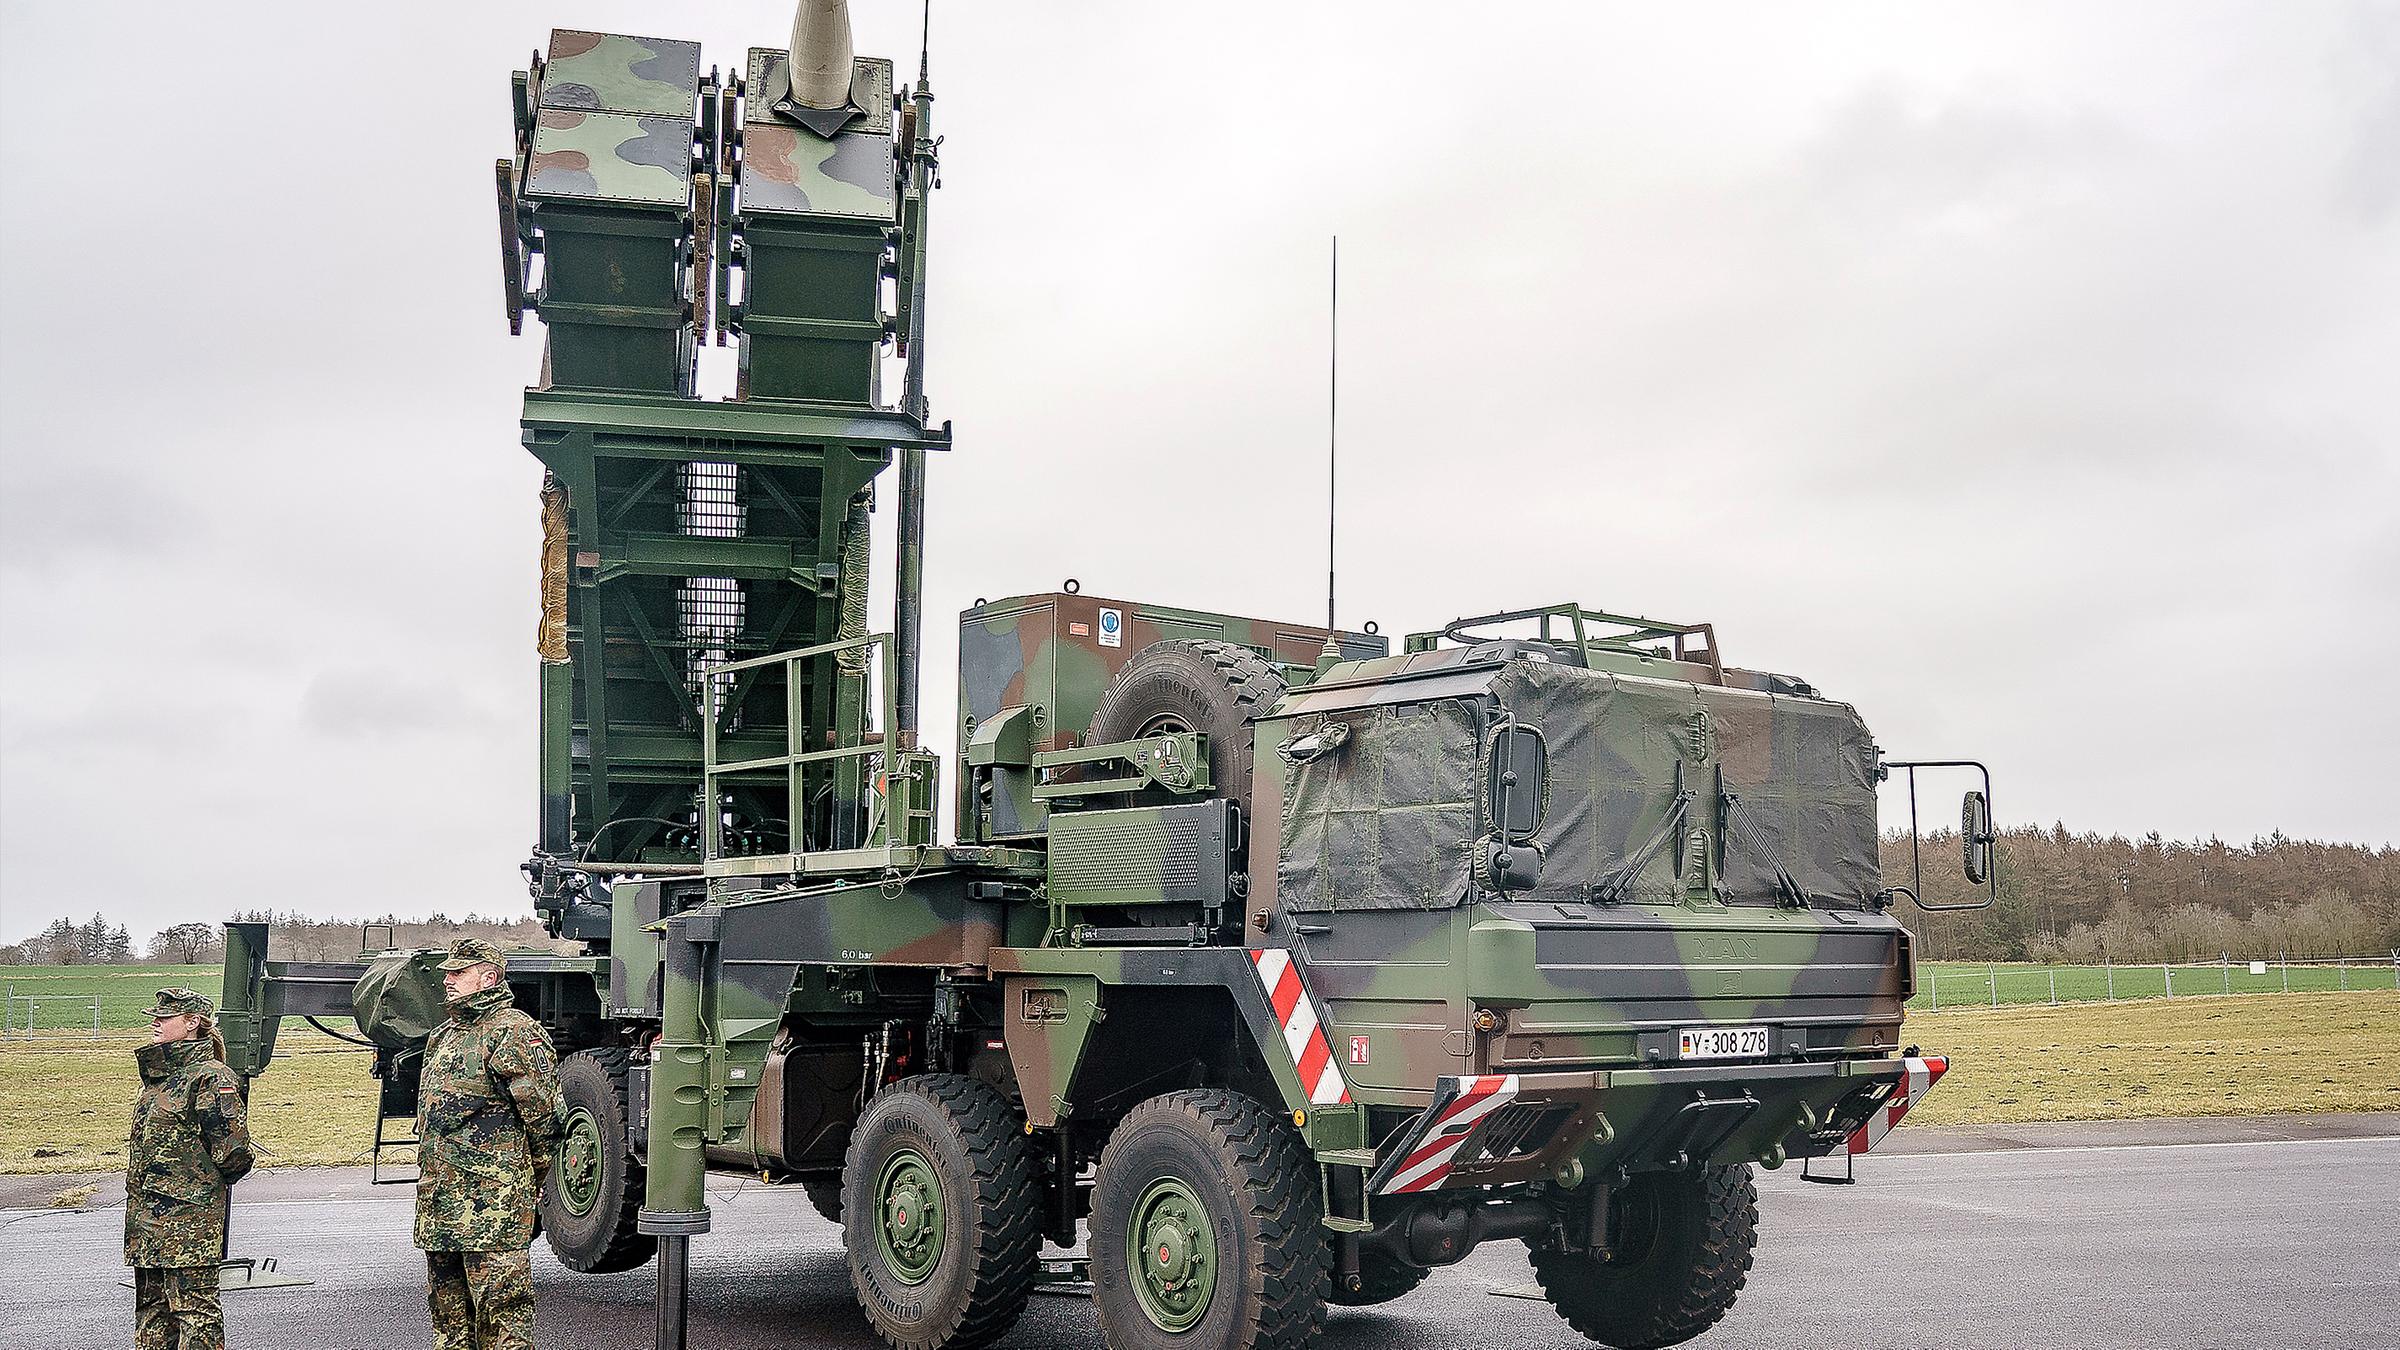 Archive: A combat-ready anti-aircraft missile system of the ·Patriot· type of the Bundeswehr's No. 1 anti-aircraft missile squadron is located at the airfield of the military airport in Schwesing. 